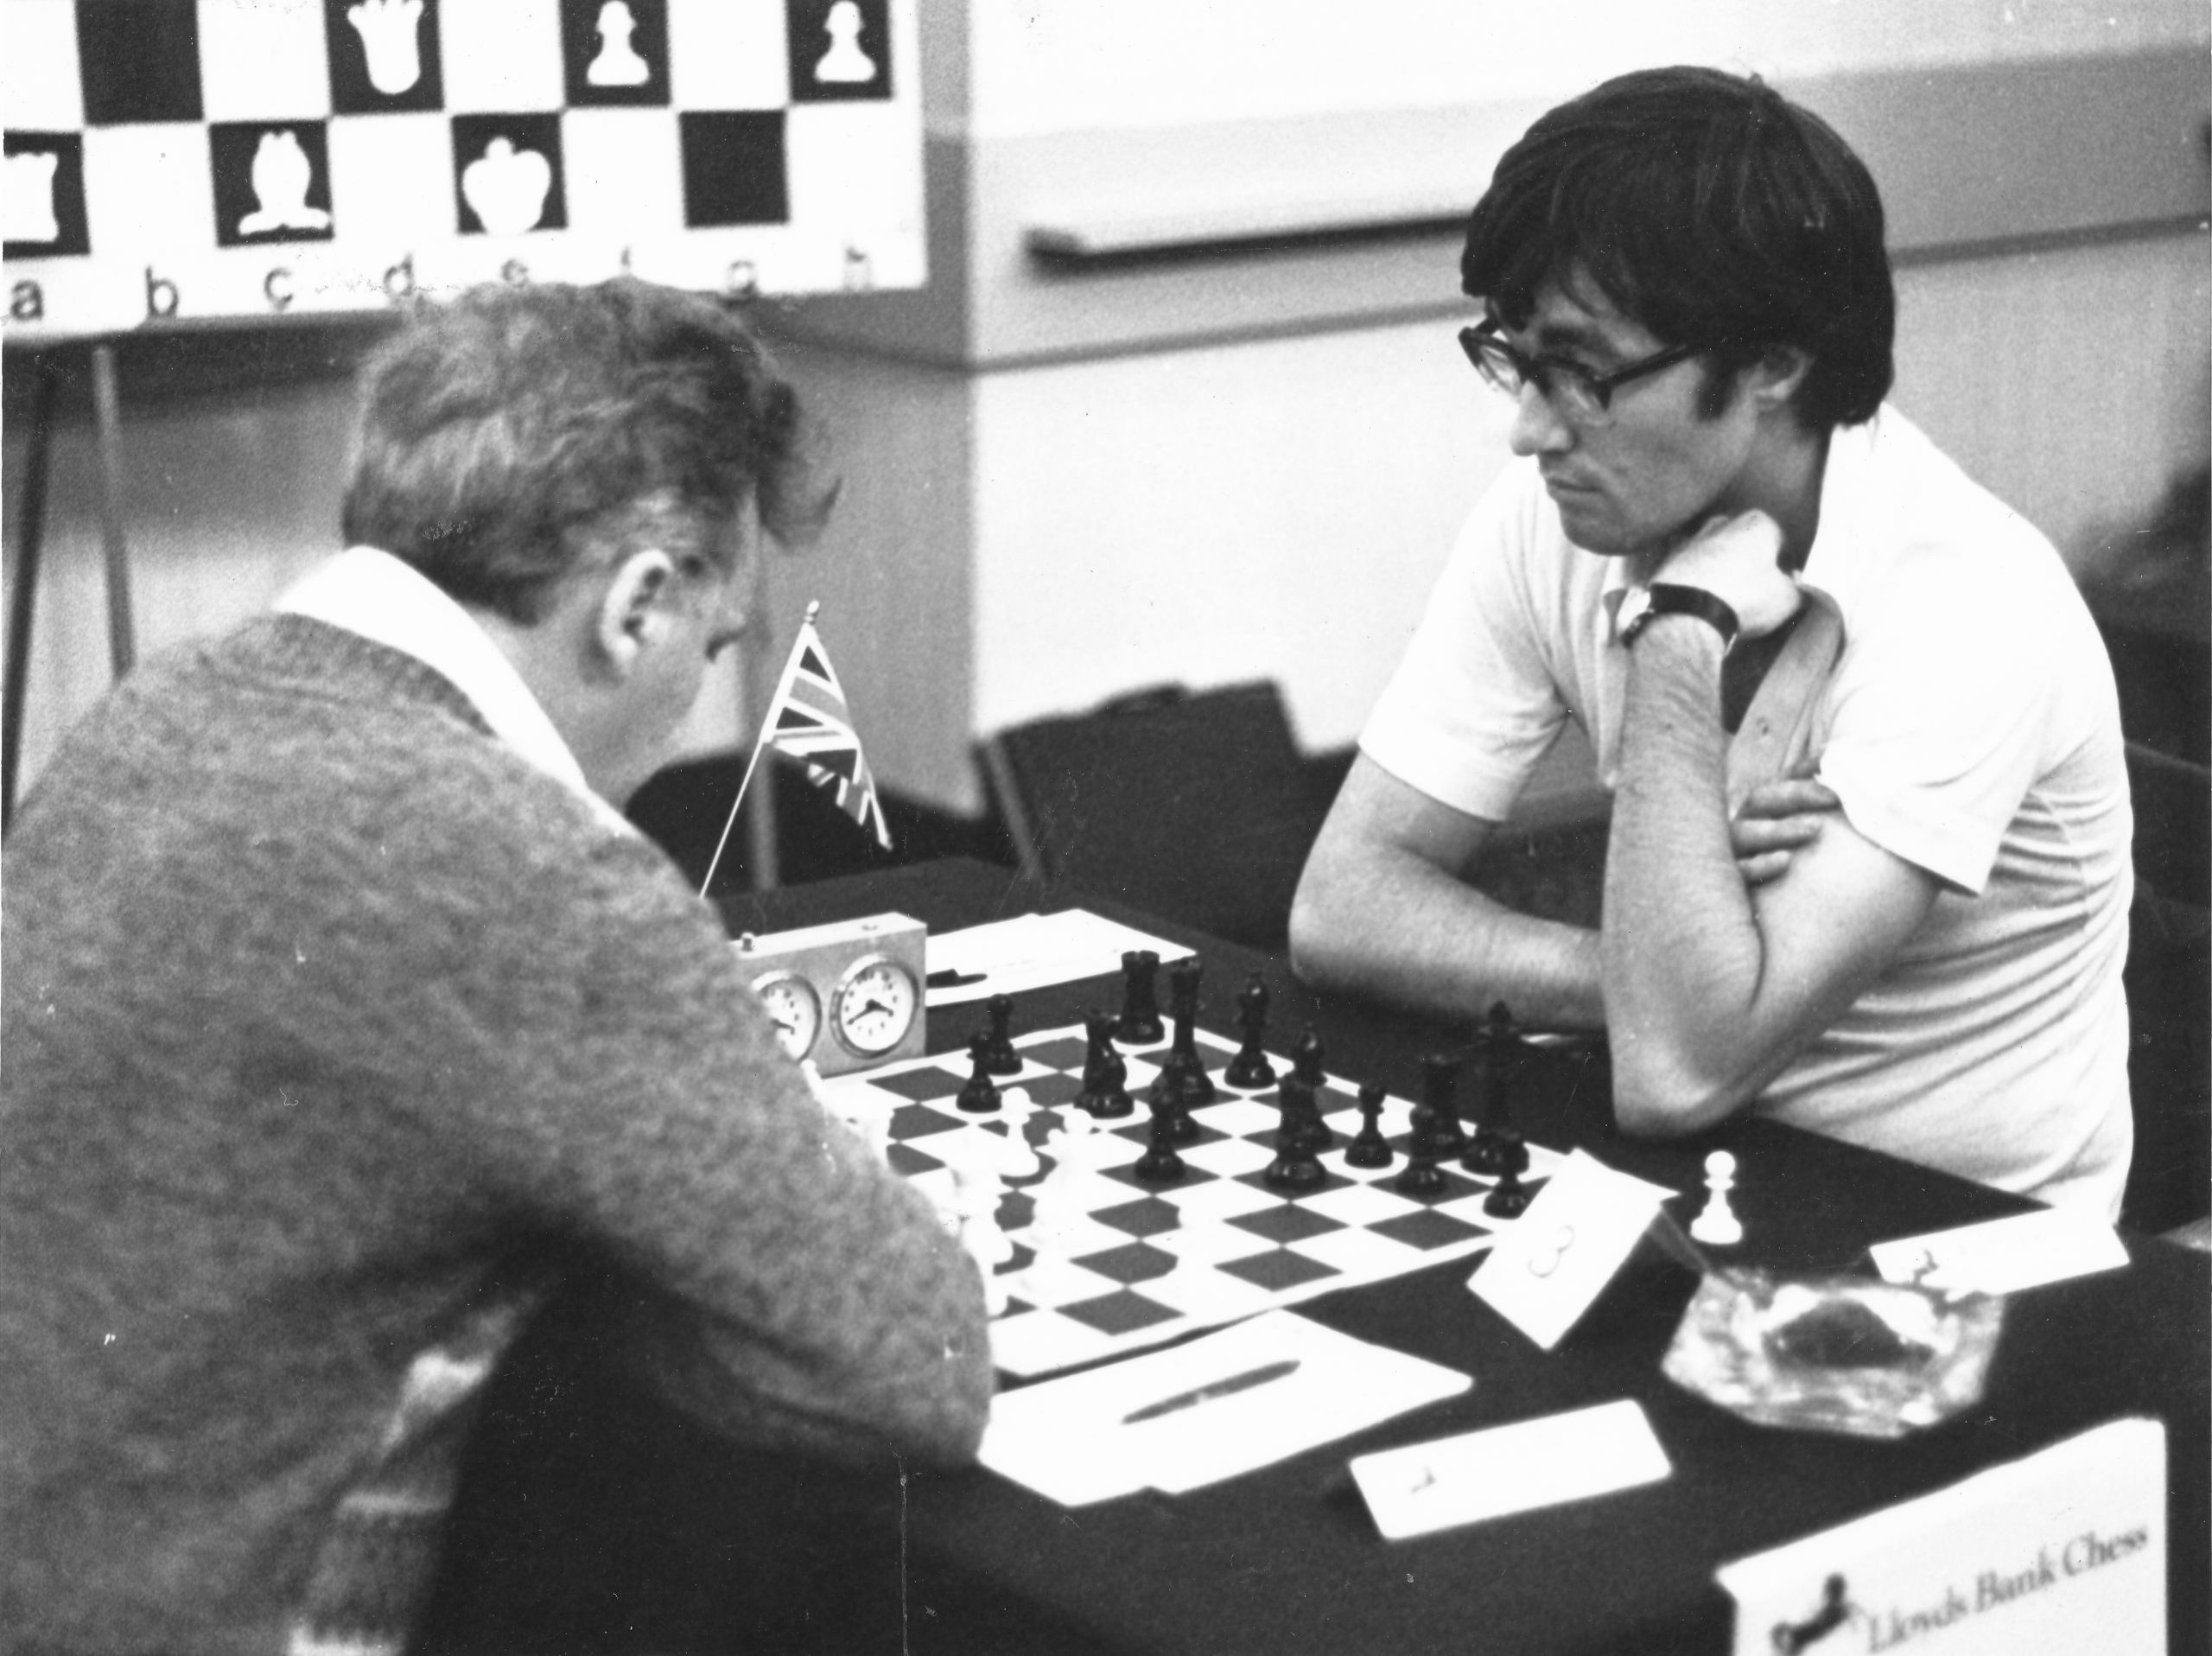 Leonid Shamkovich plays Paul Littlewood during the 1978 Lloyds Bank Masters. Paul won the game,